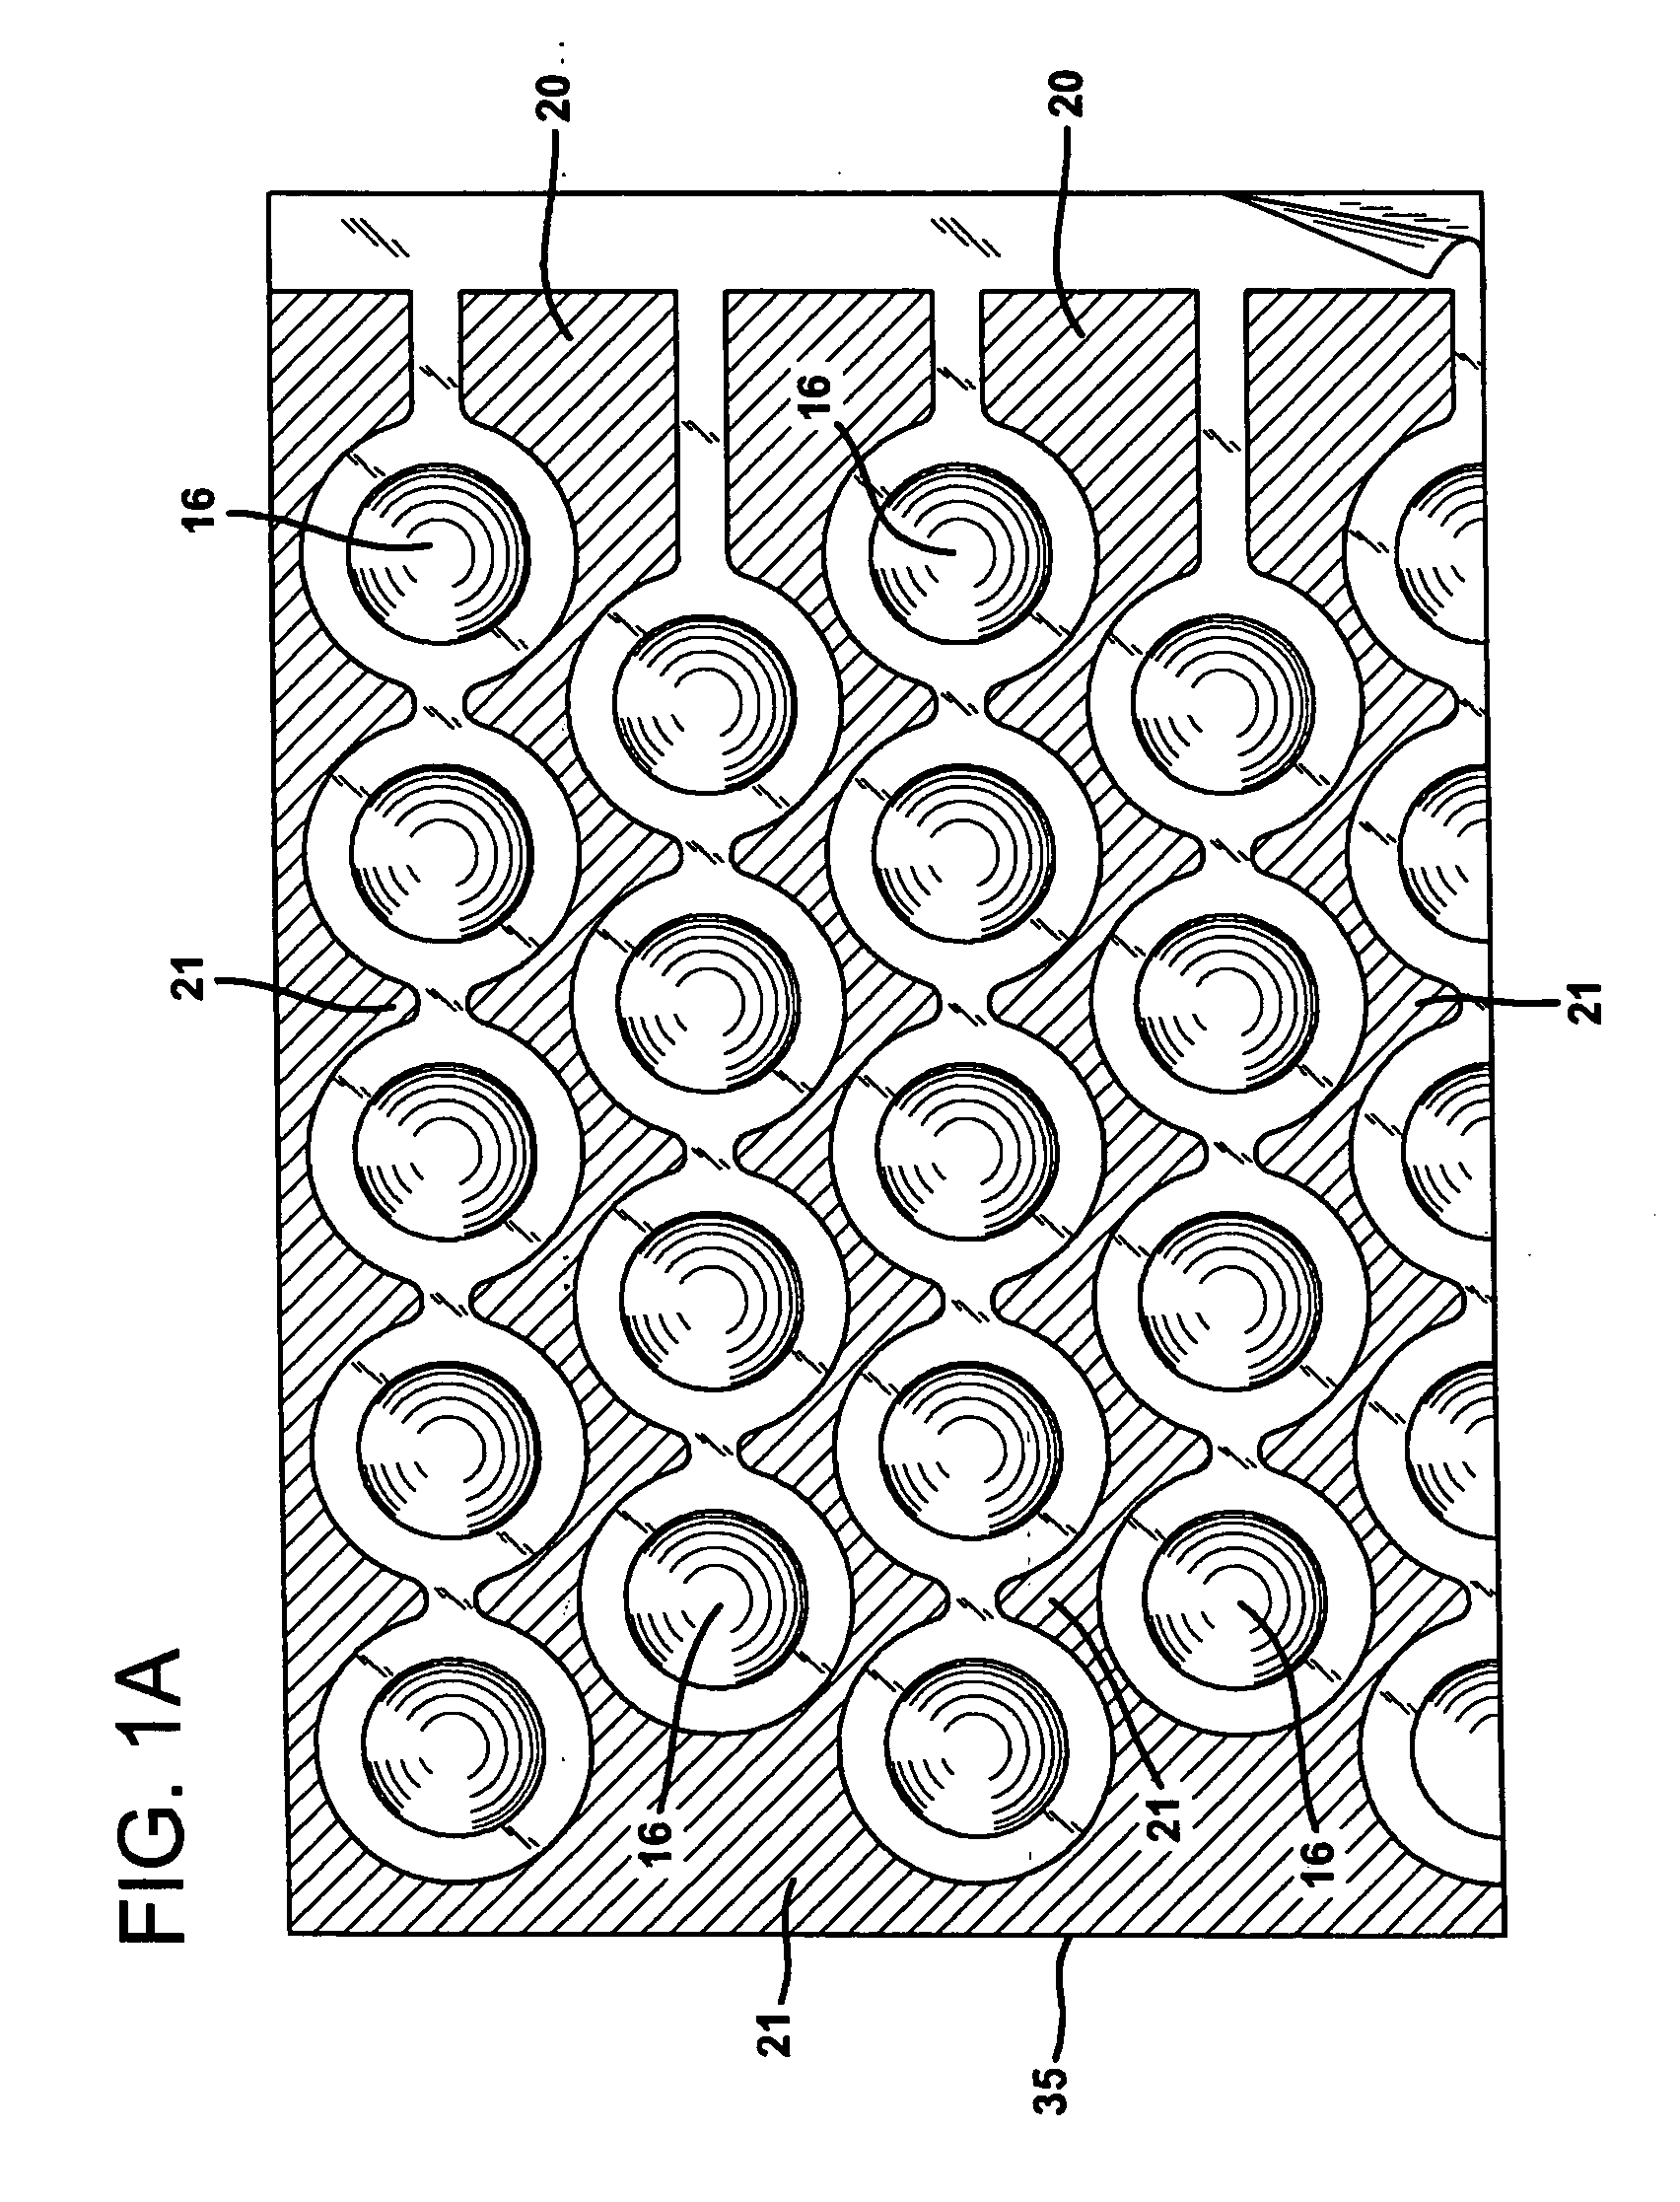 Formed inflatable cellular cushioning article and method of making same